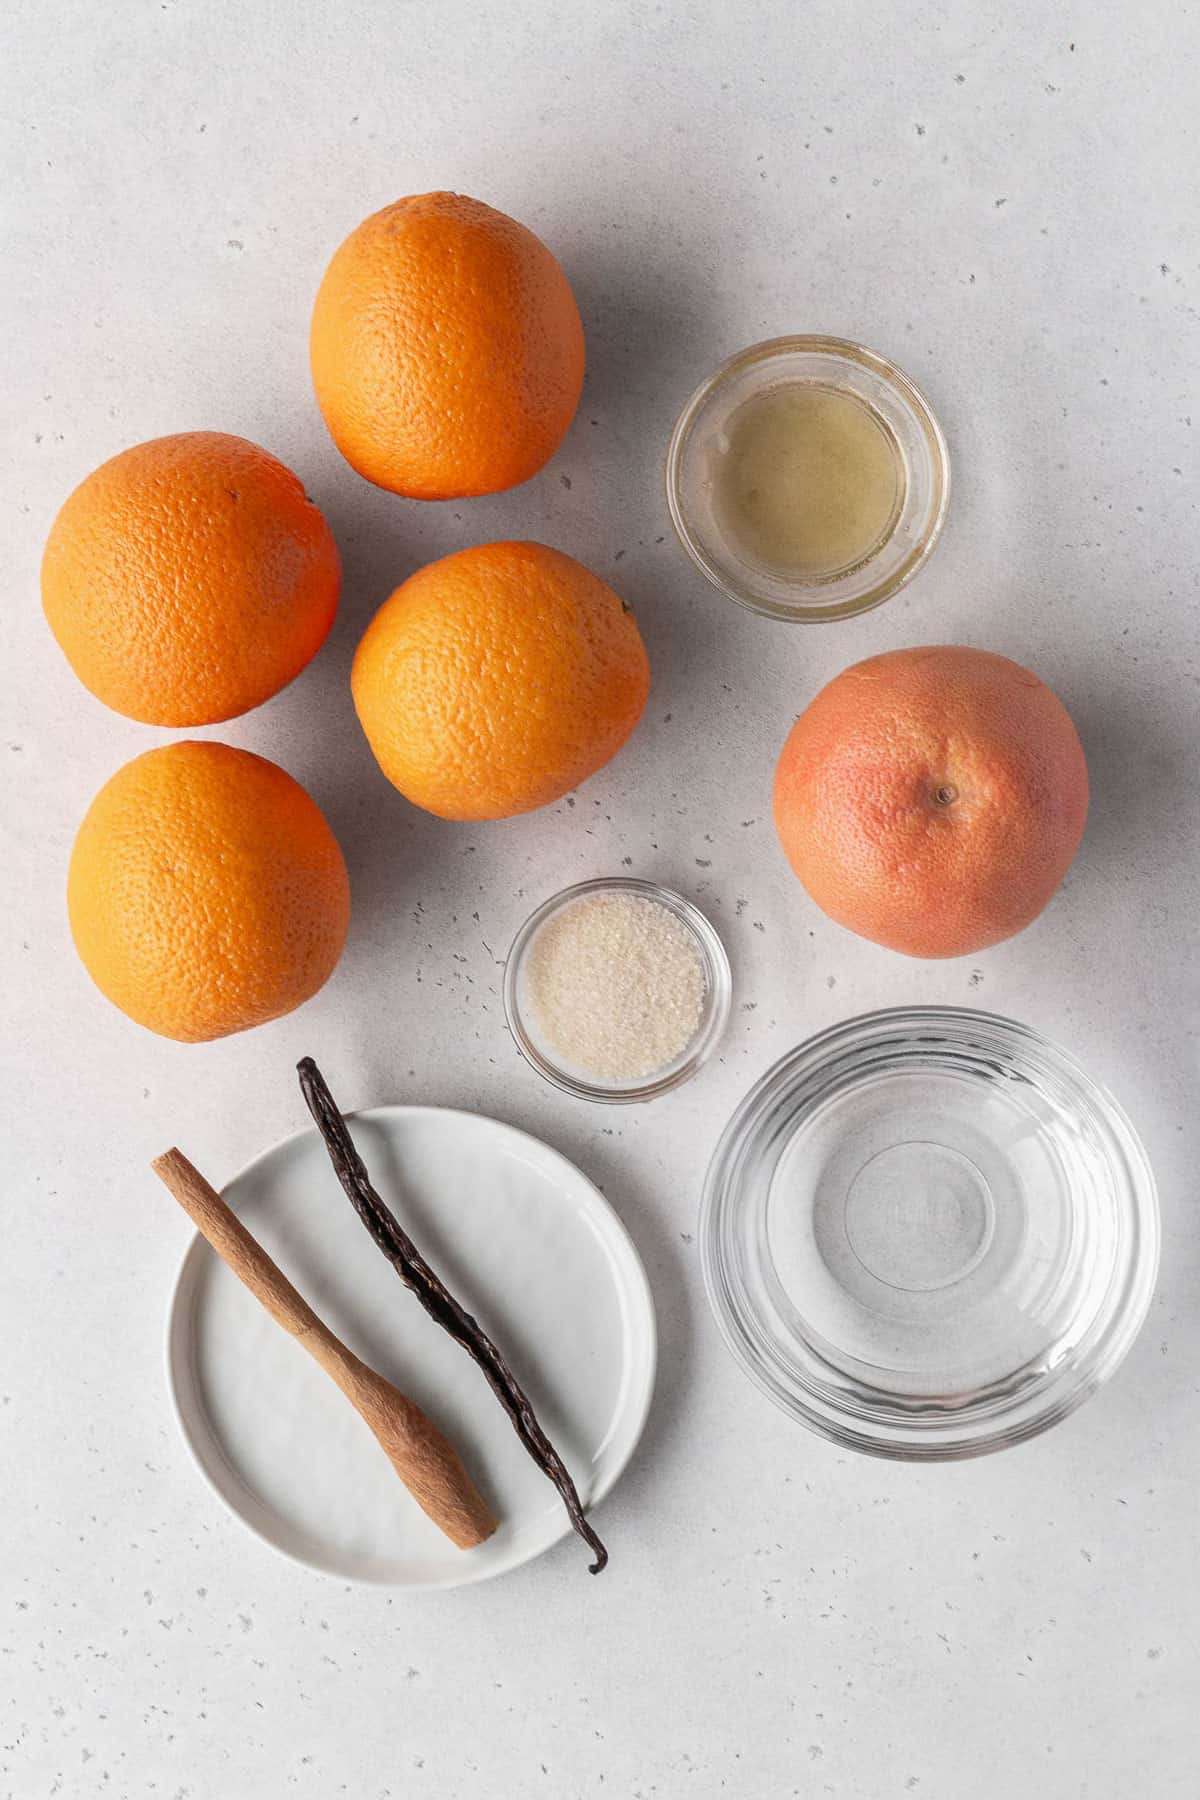 Citrus compote ingredients on a white surface.